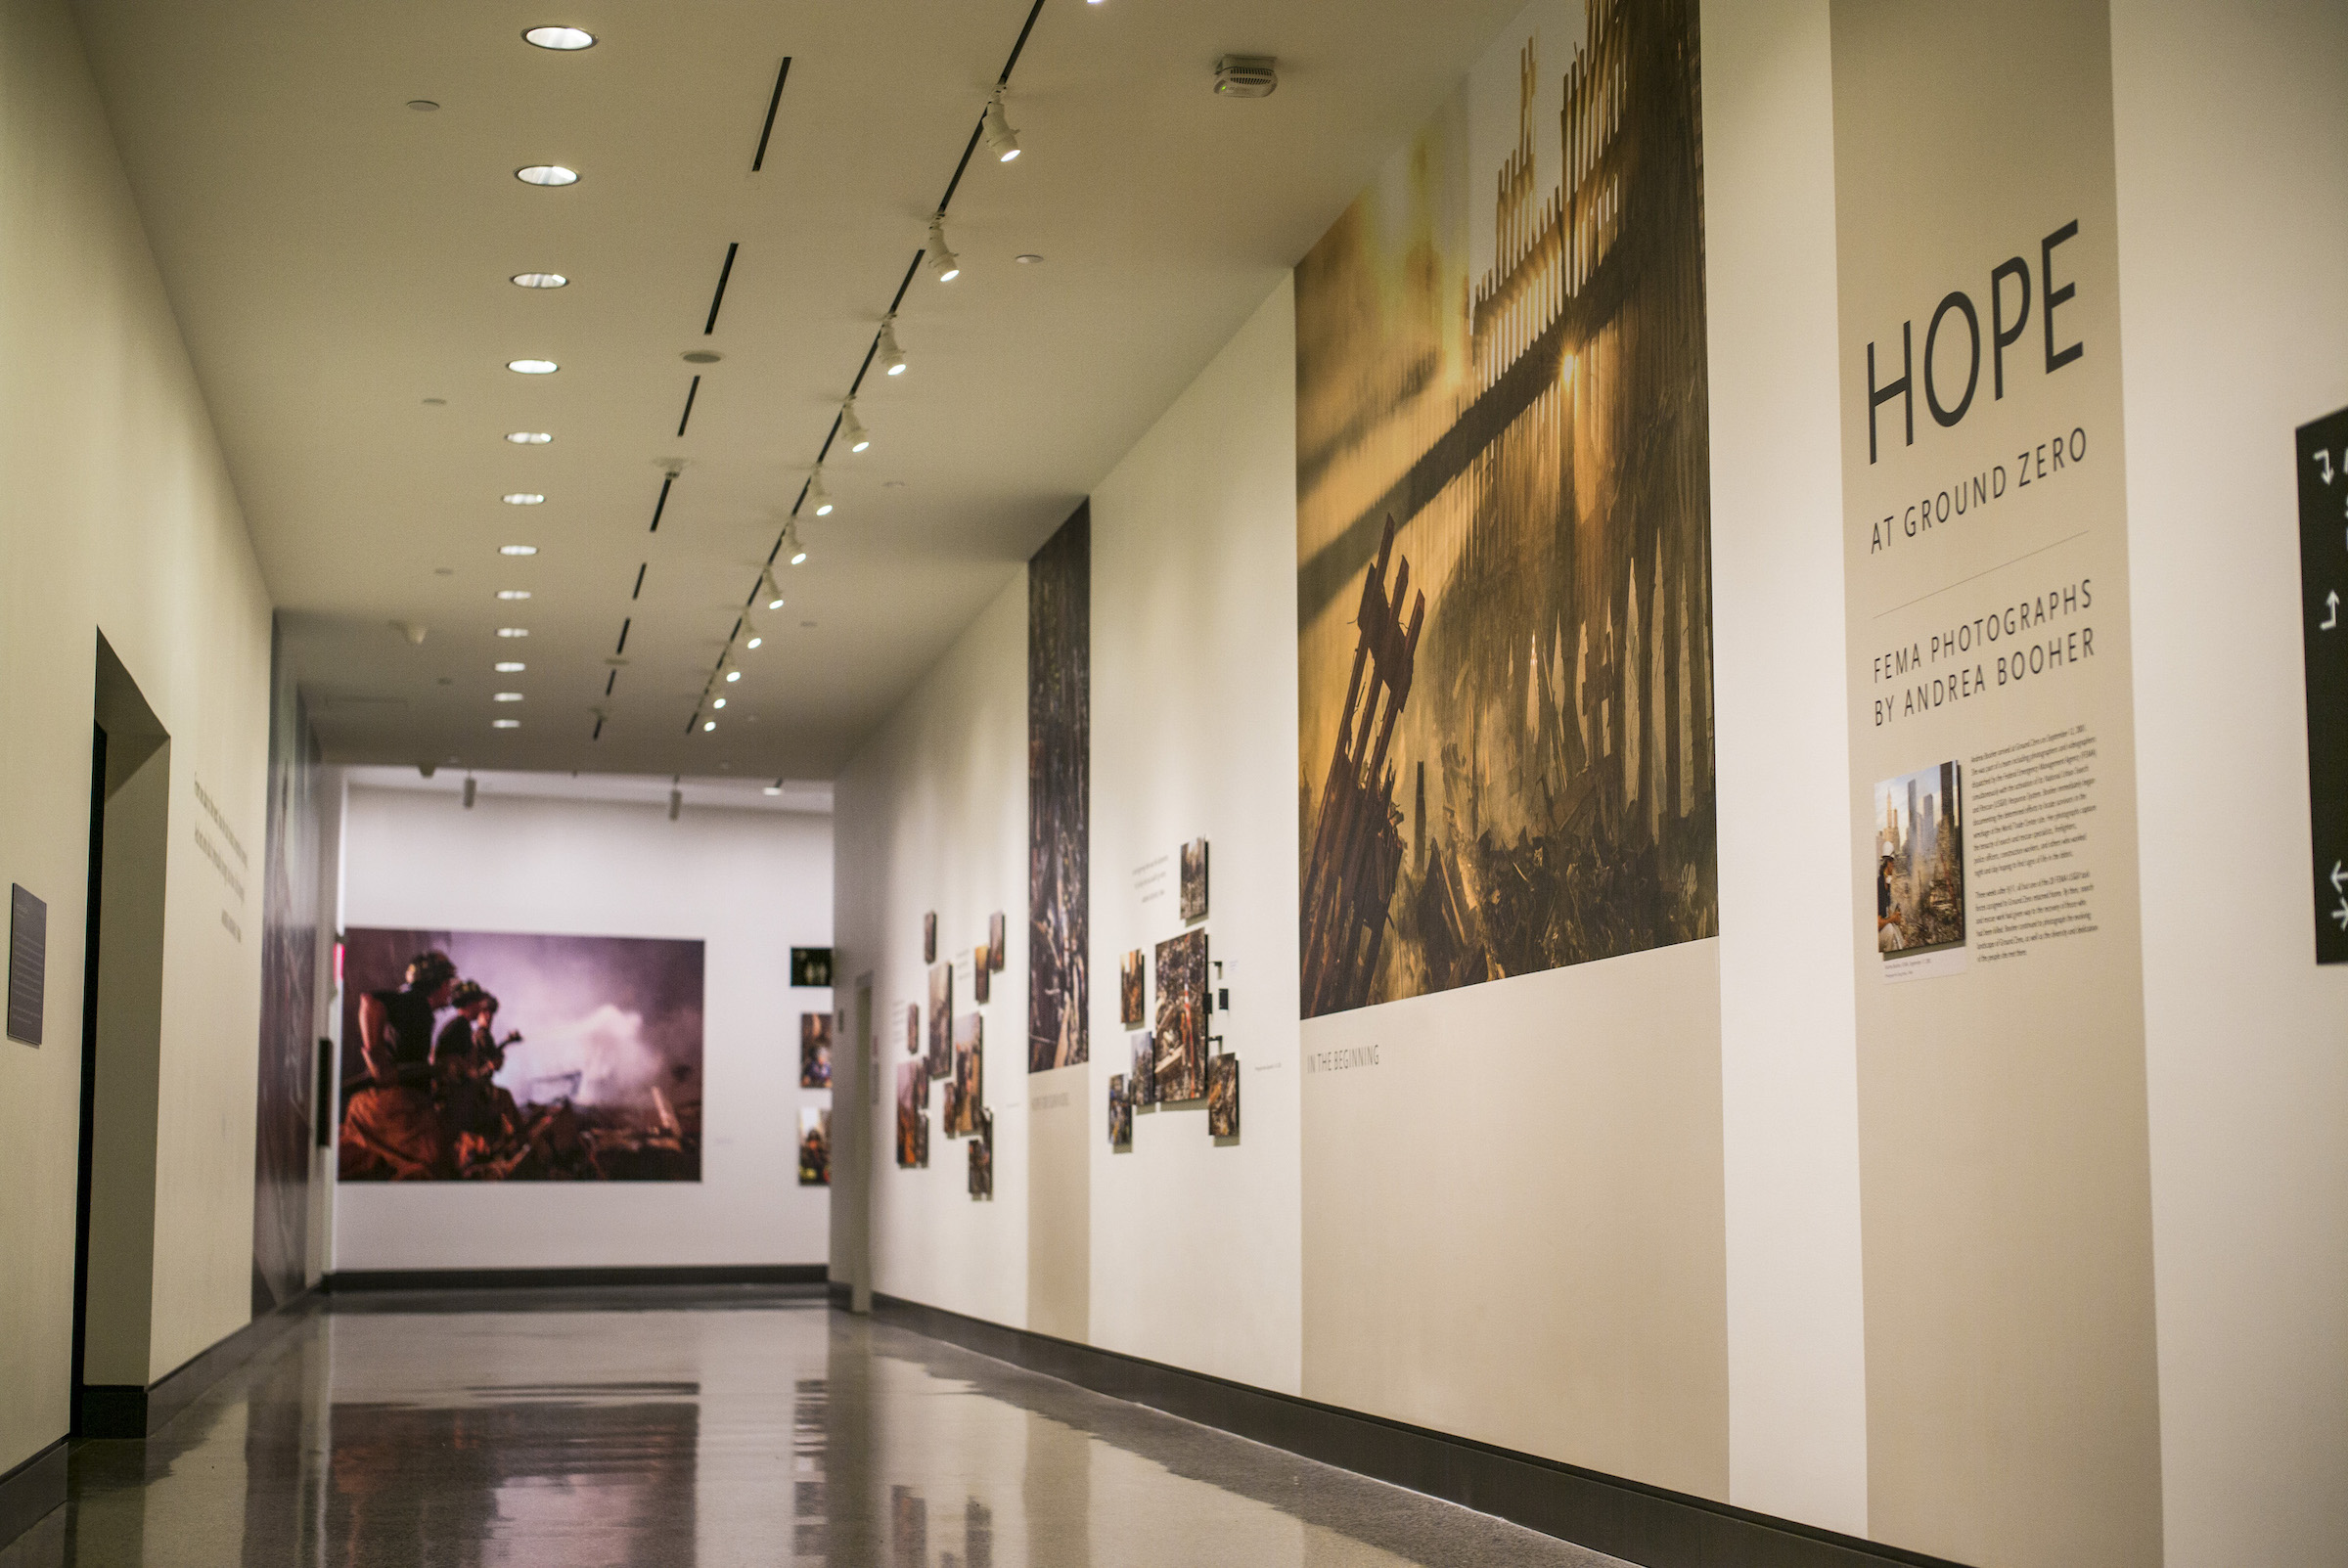 A collection of photographs documenting the work of dedicated men and women at Ground Zero after 9/11 are displayed as part of the exhibition Hope at Ground Zero: FEMA Photographs by Andrea Booher. 